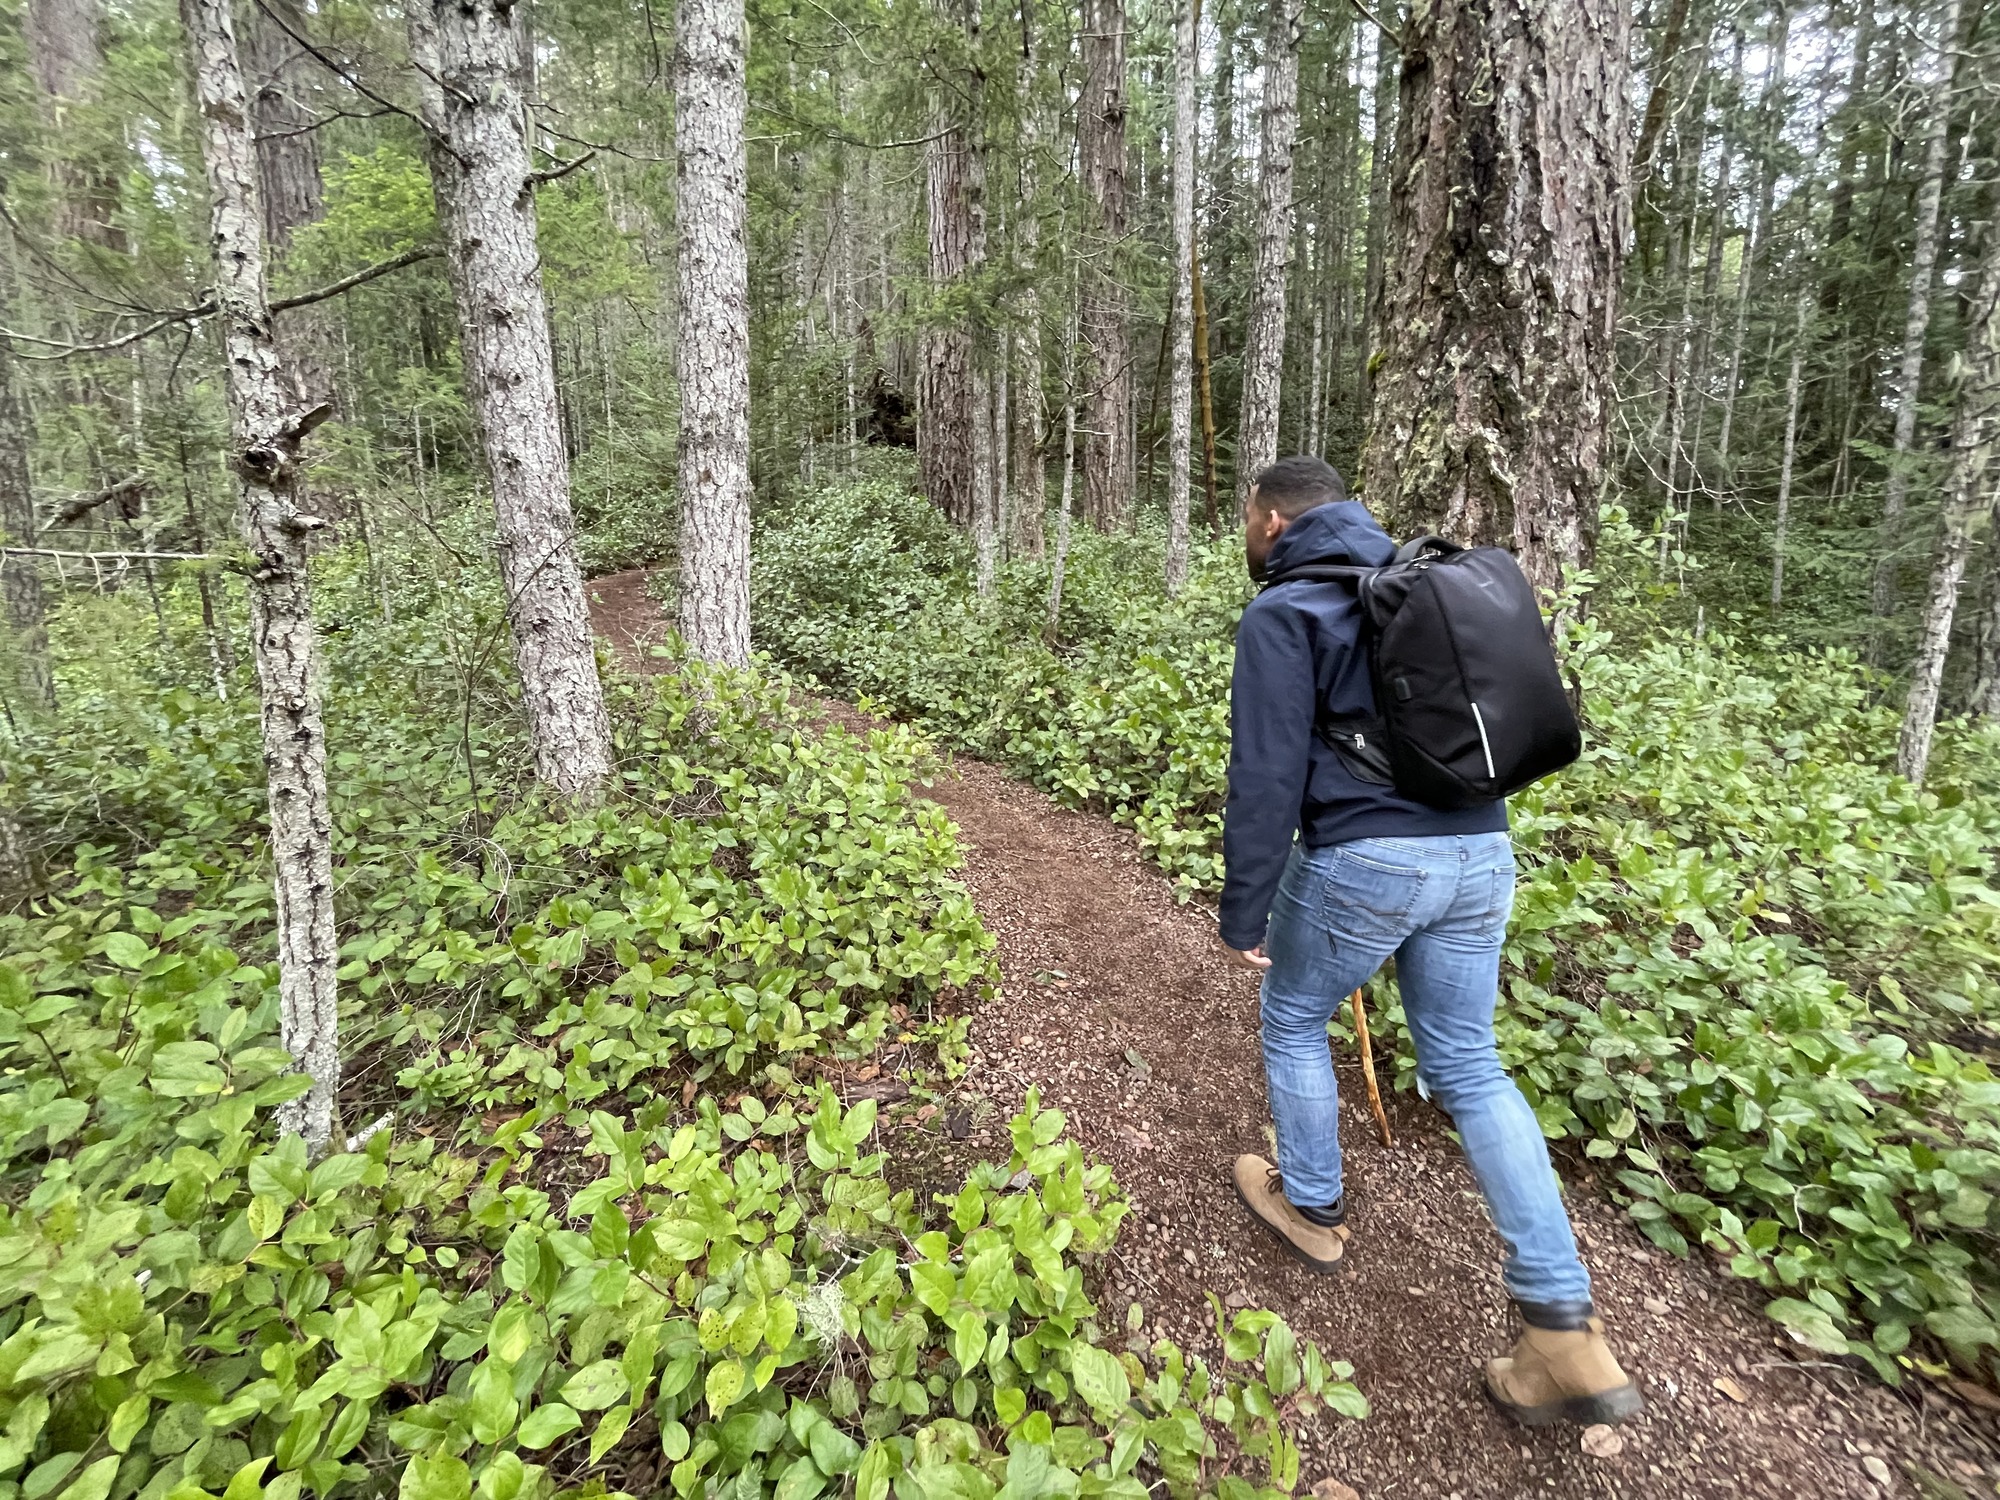 Man walking on path surrounded by forest.